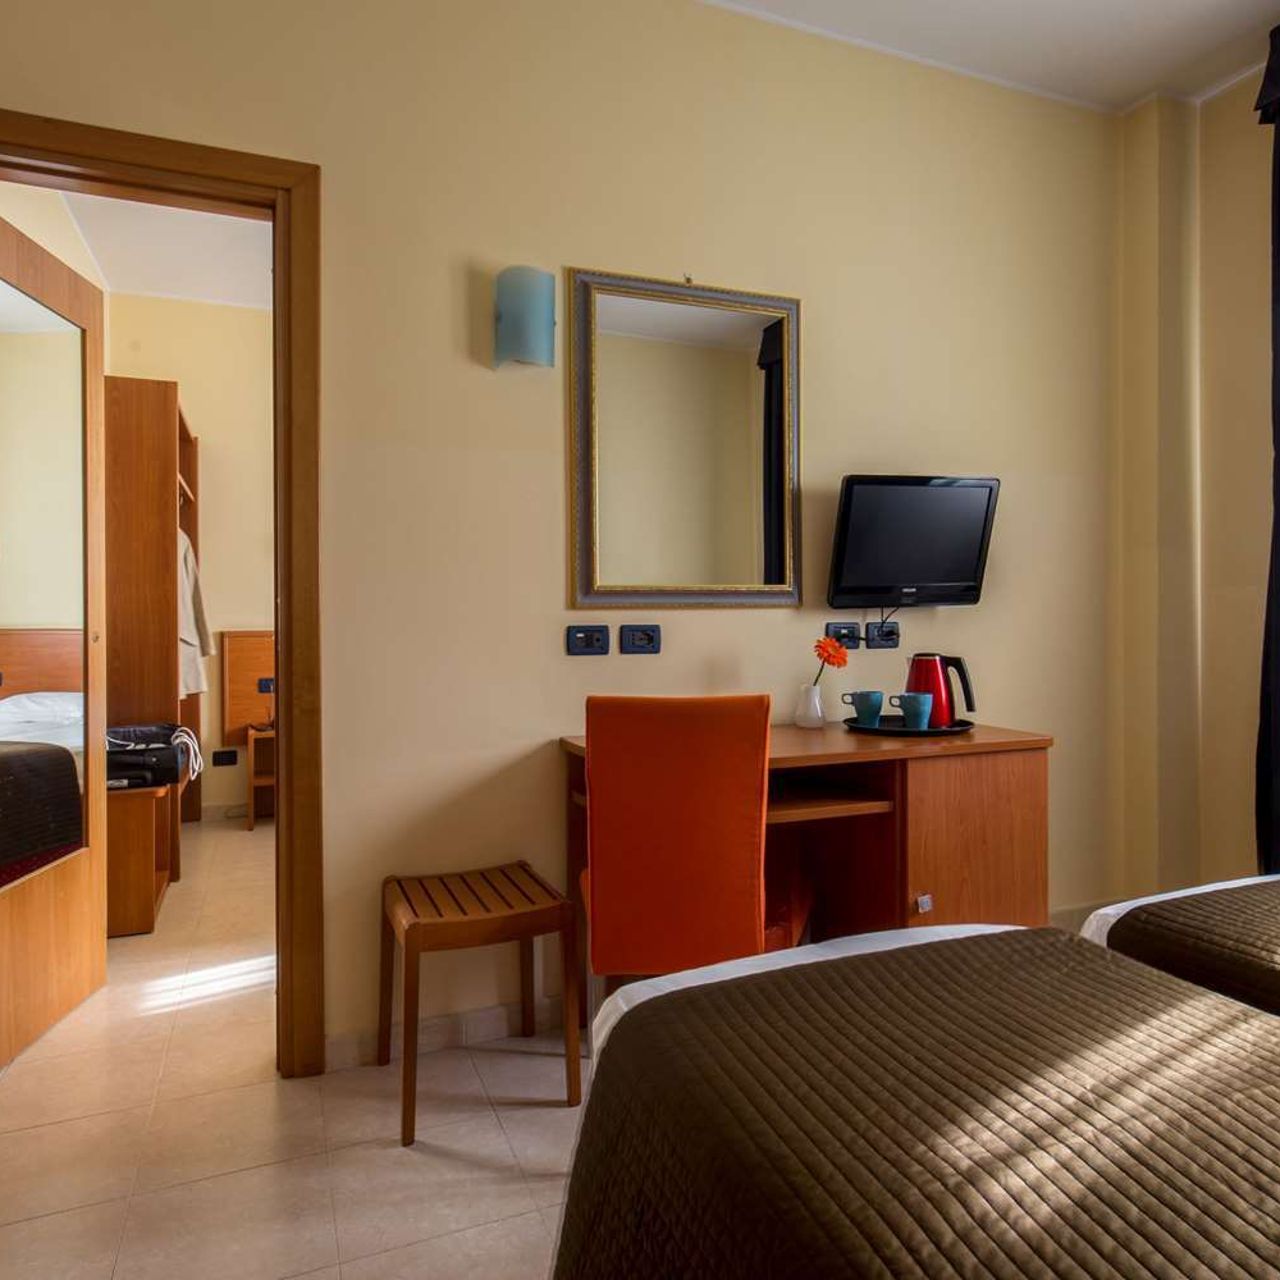 Best Western Blu Hotel Roma - Rome - Great prices at HOTEL INFO